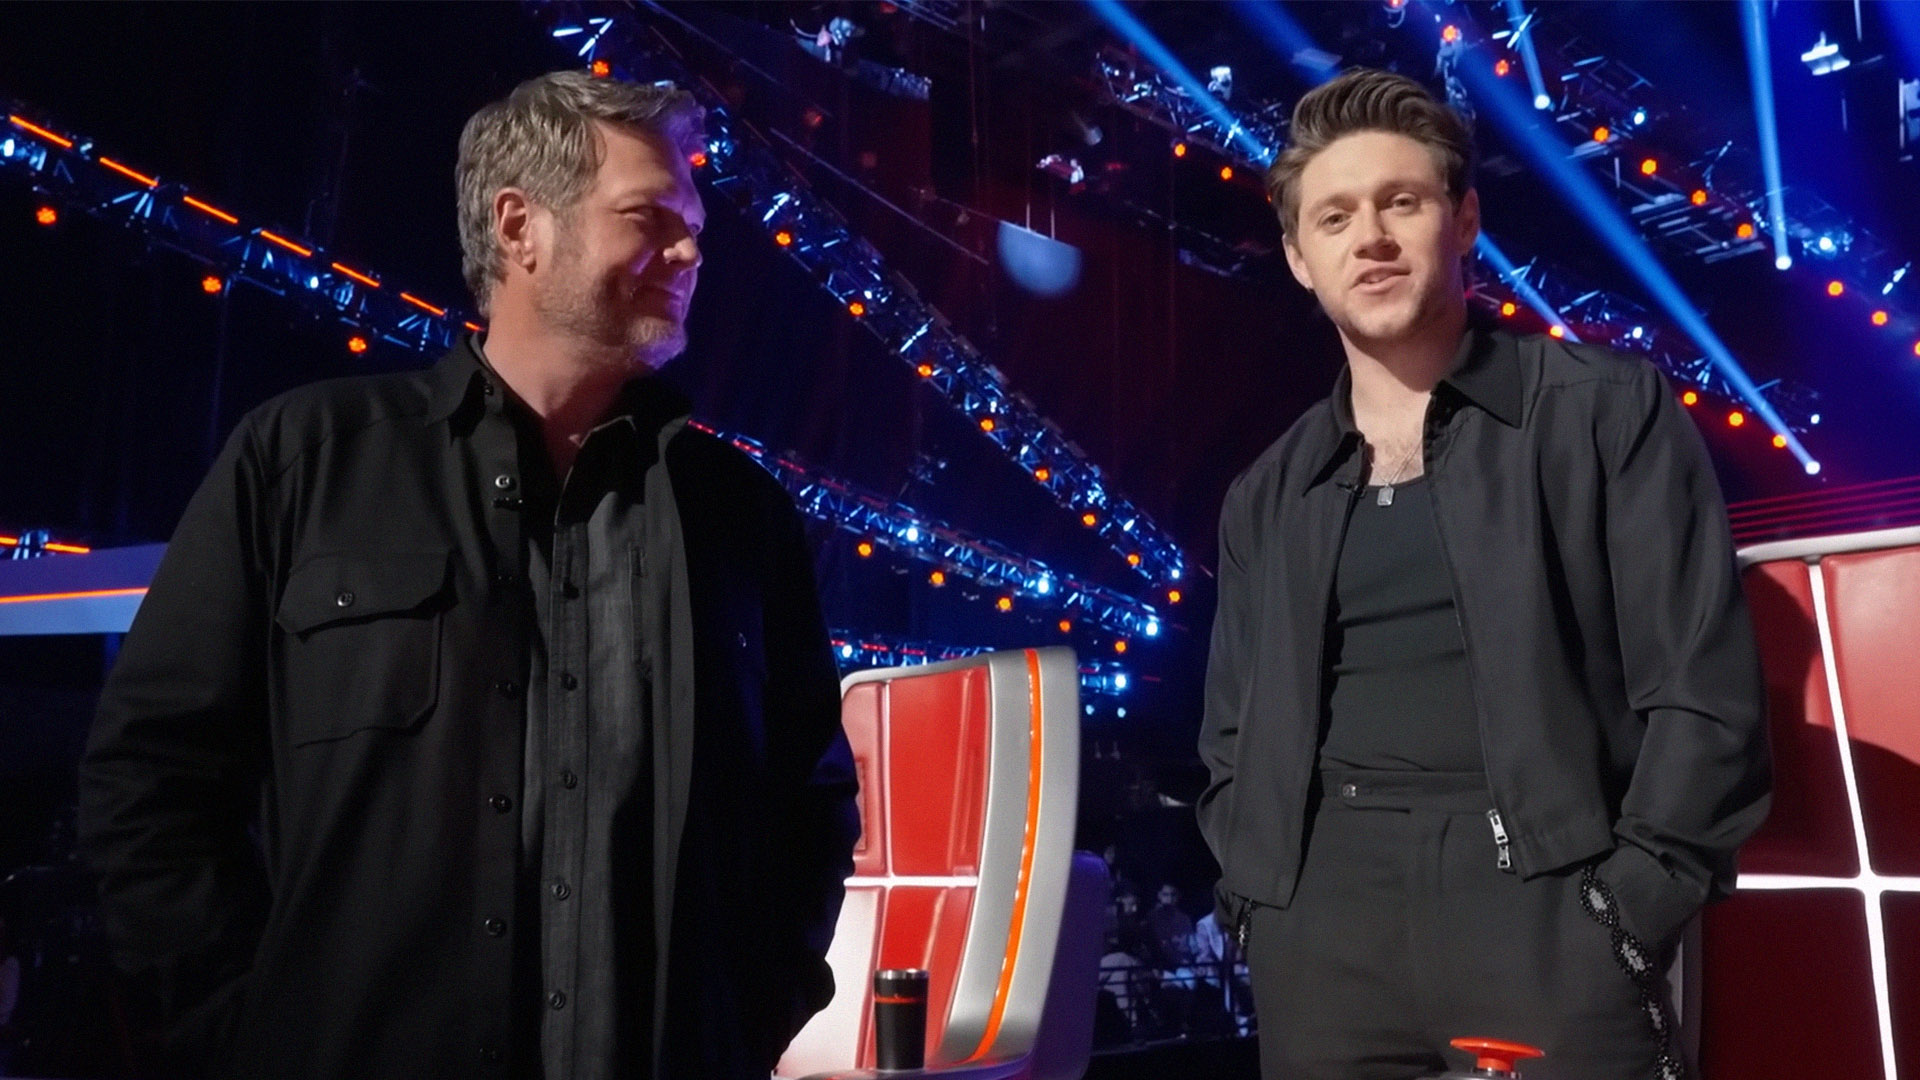 Niall Horan Surprises Blake Shelton with a Gift, Melts The Voice Fans' Hearts